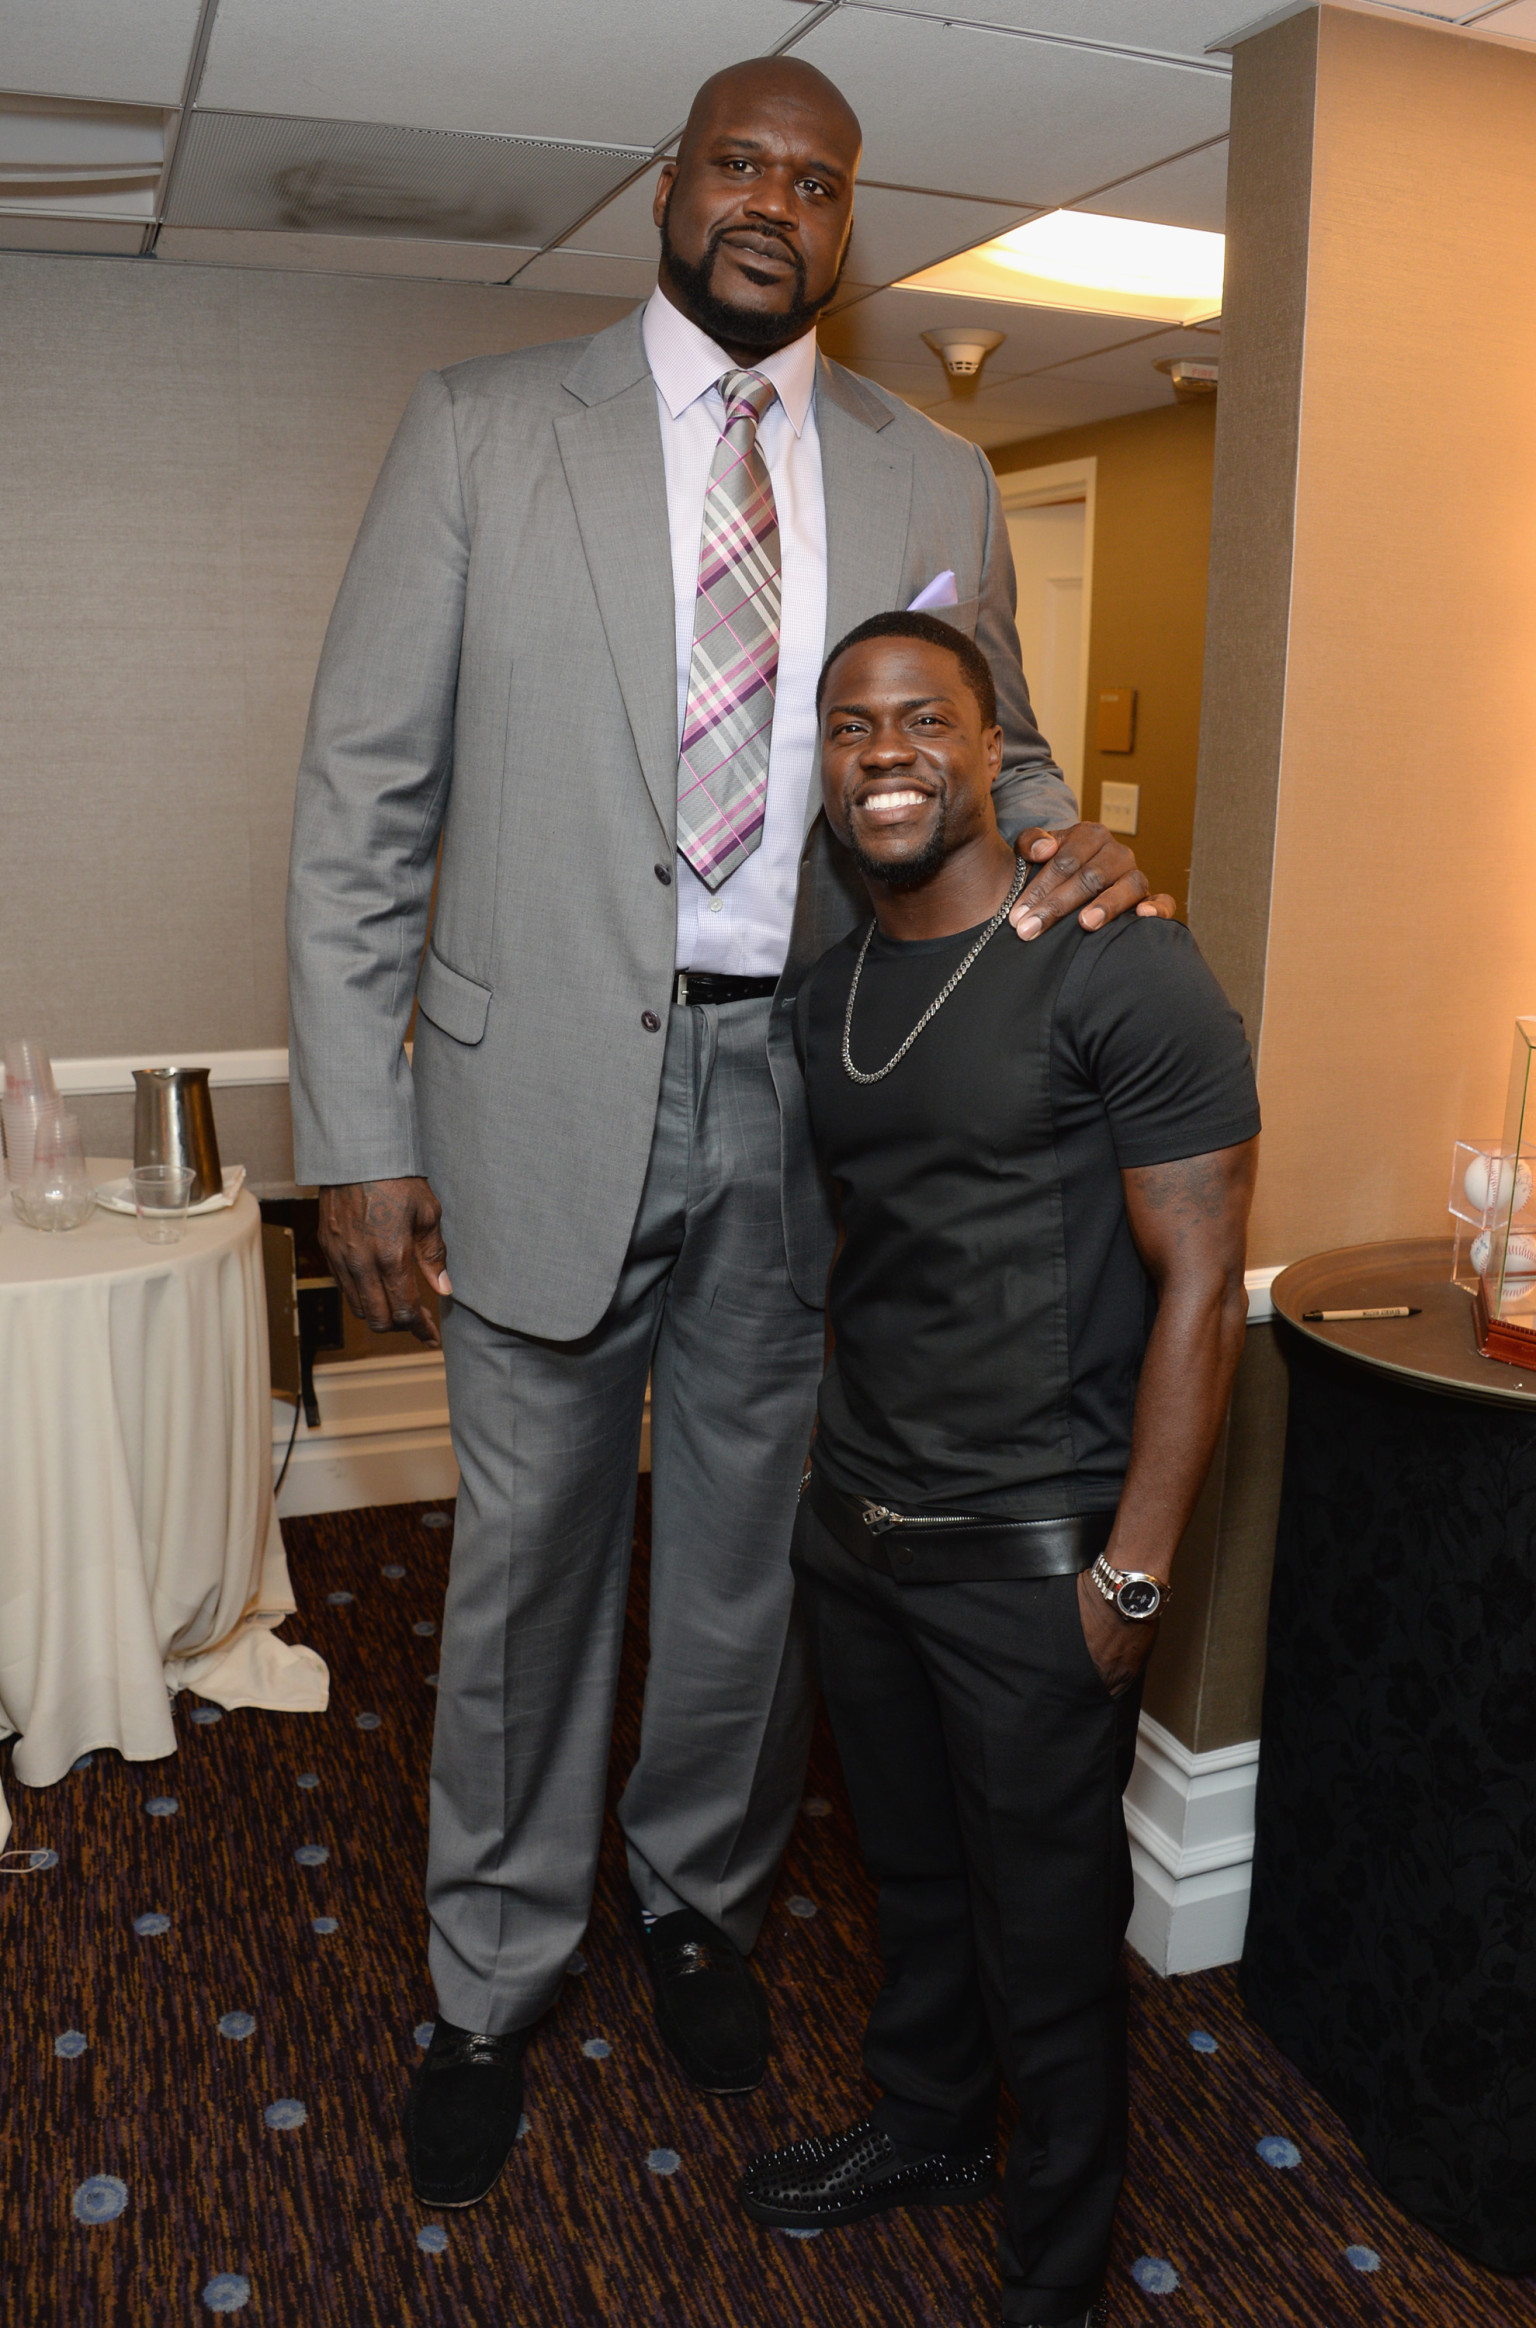 o-SHAQUILLE-ONEAL-KEVIN-HART-facebook.jpg